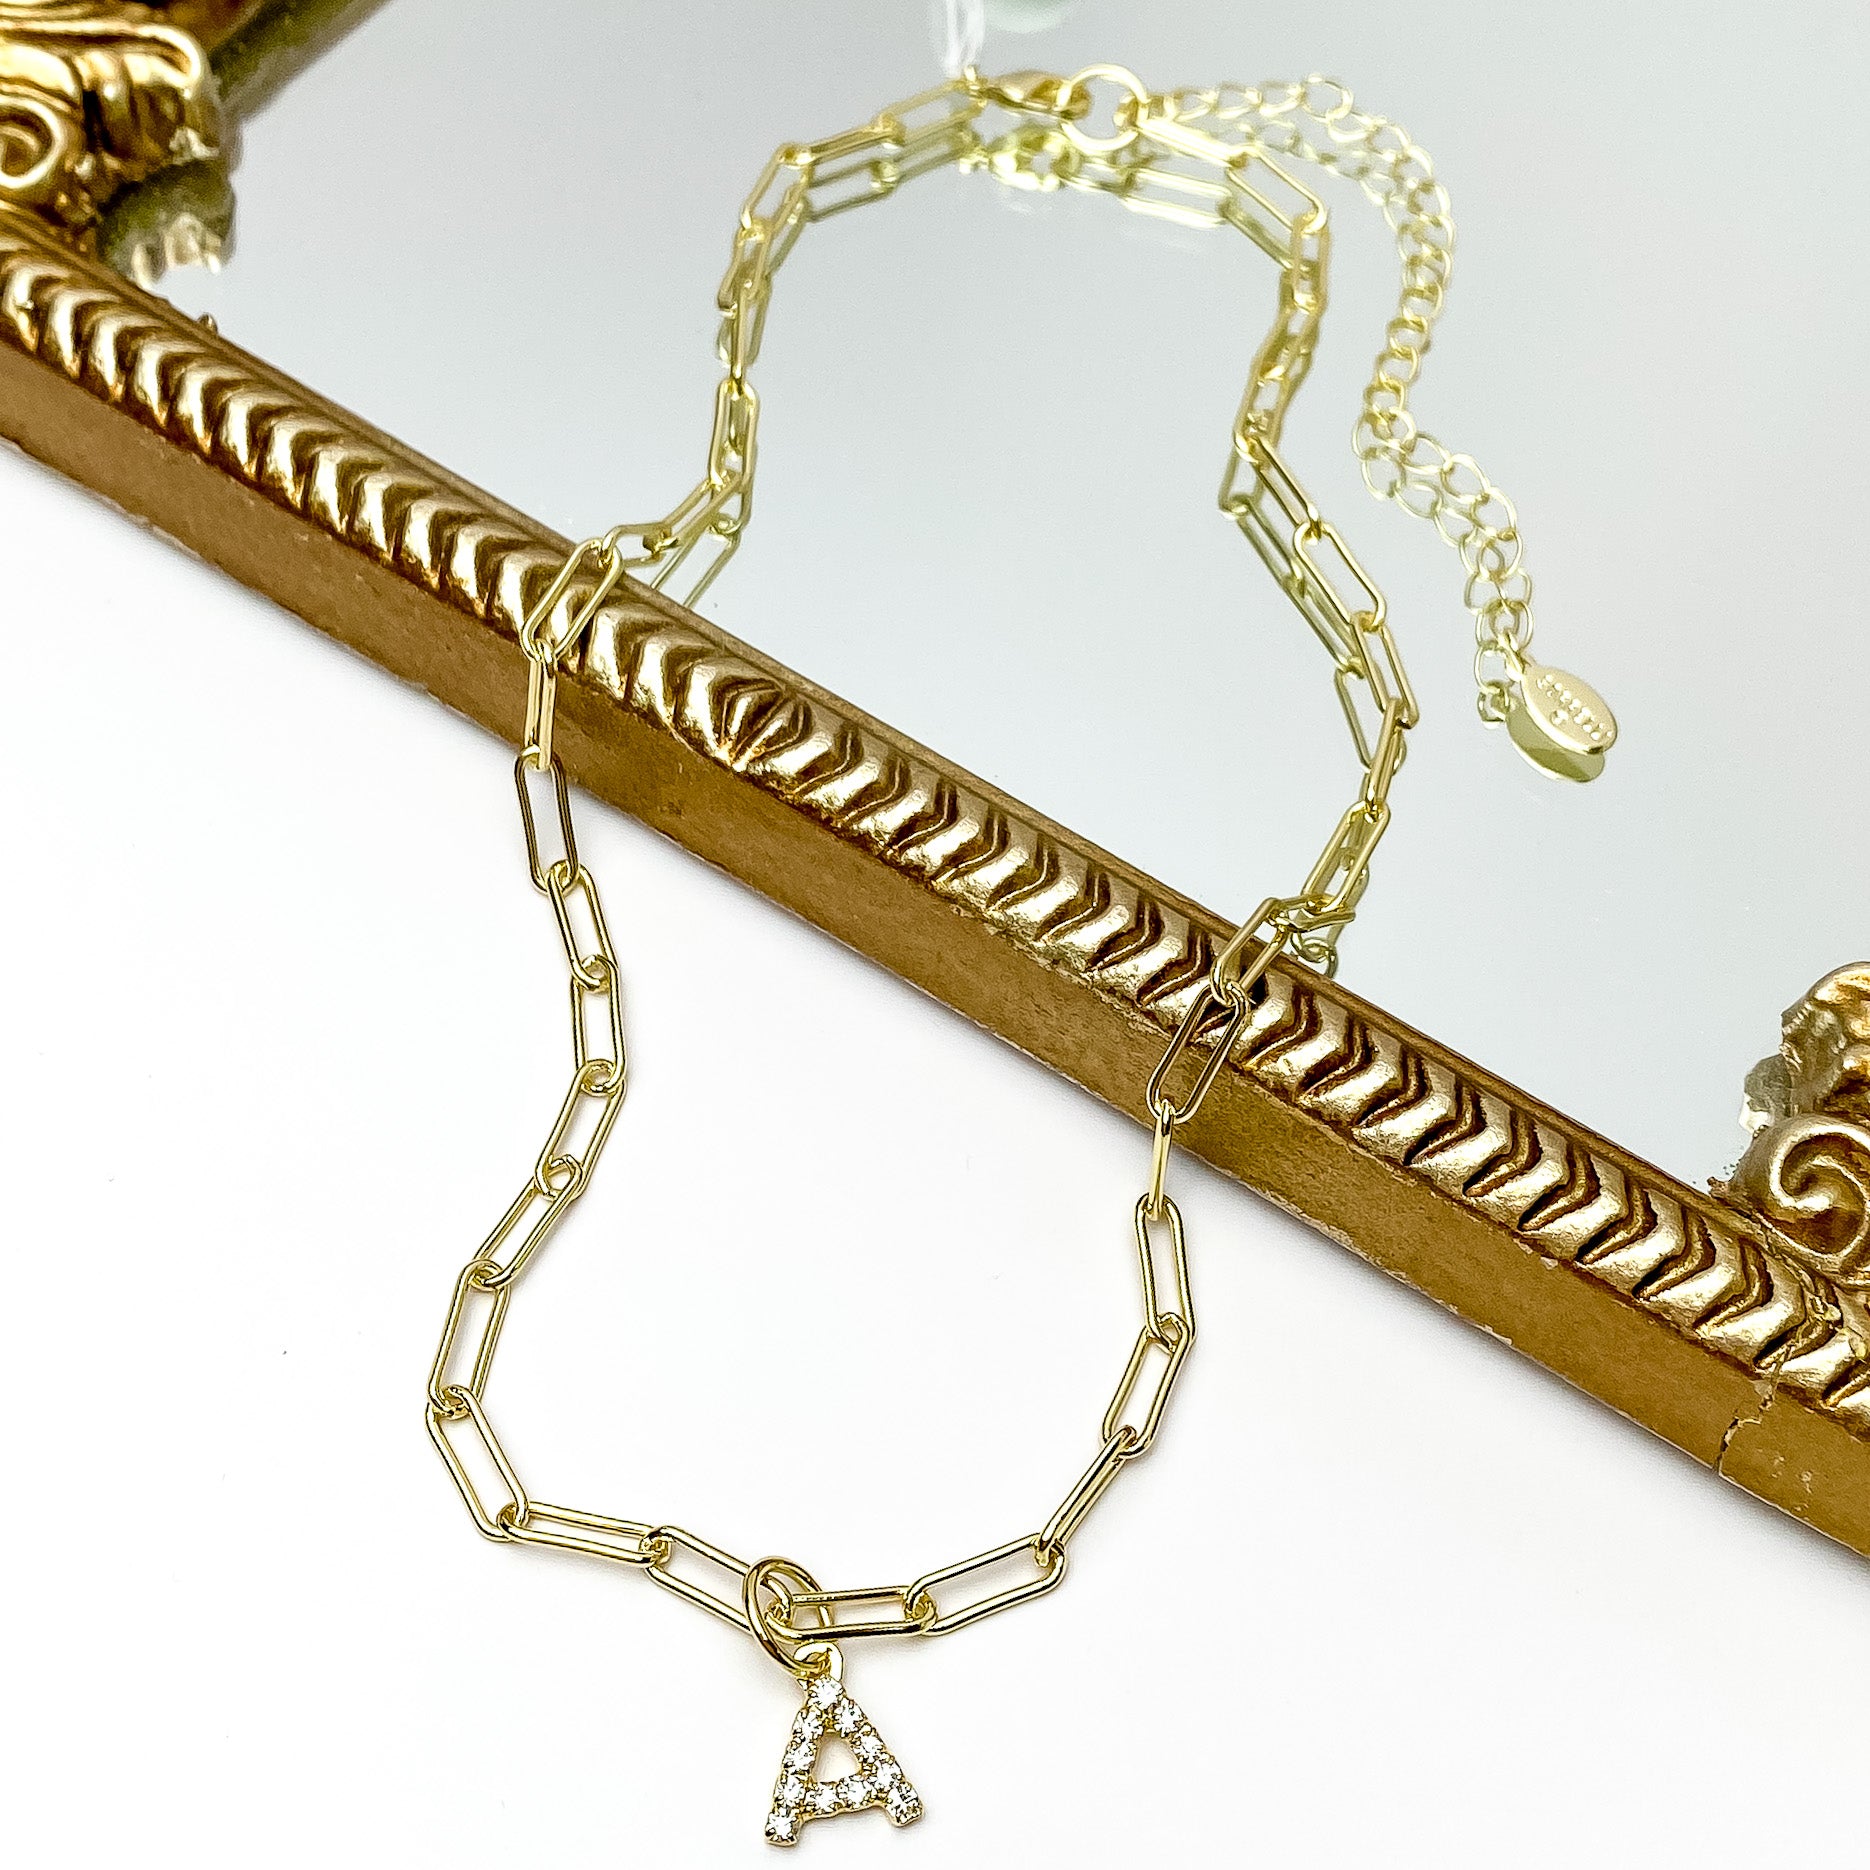 Sorrelli | Initial Pendant Necklace in Bright Gold Tone and Crystal